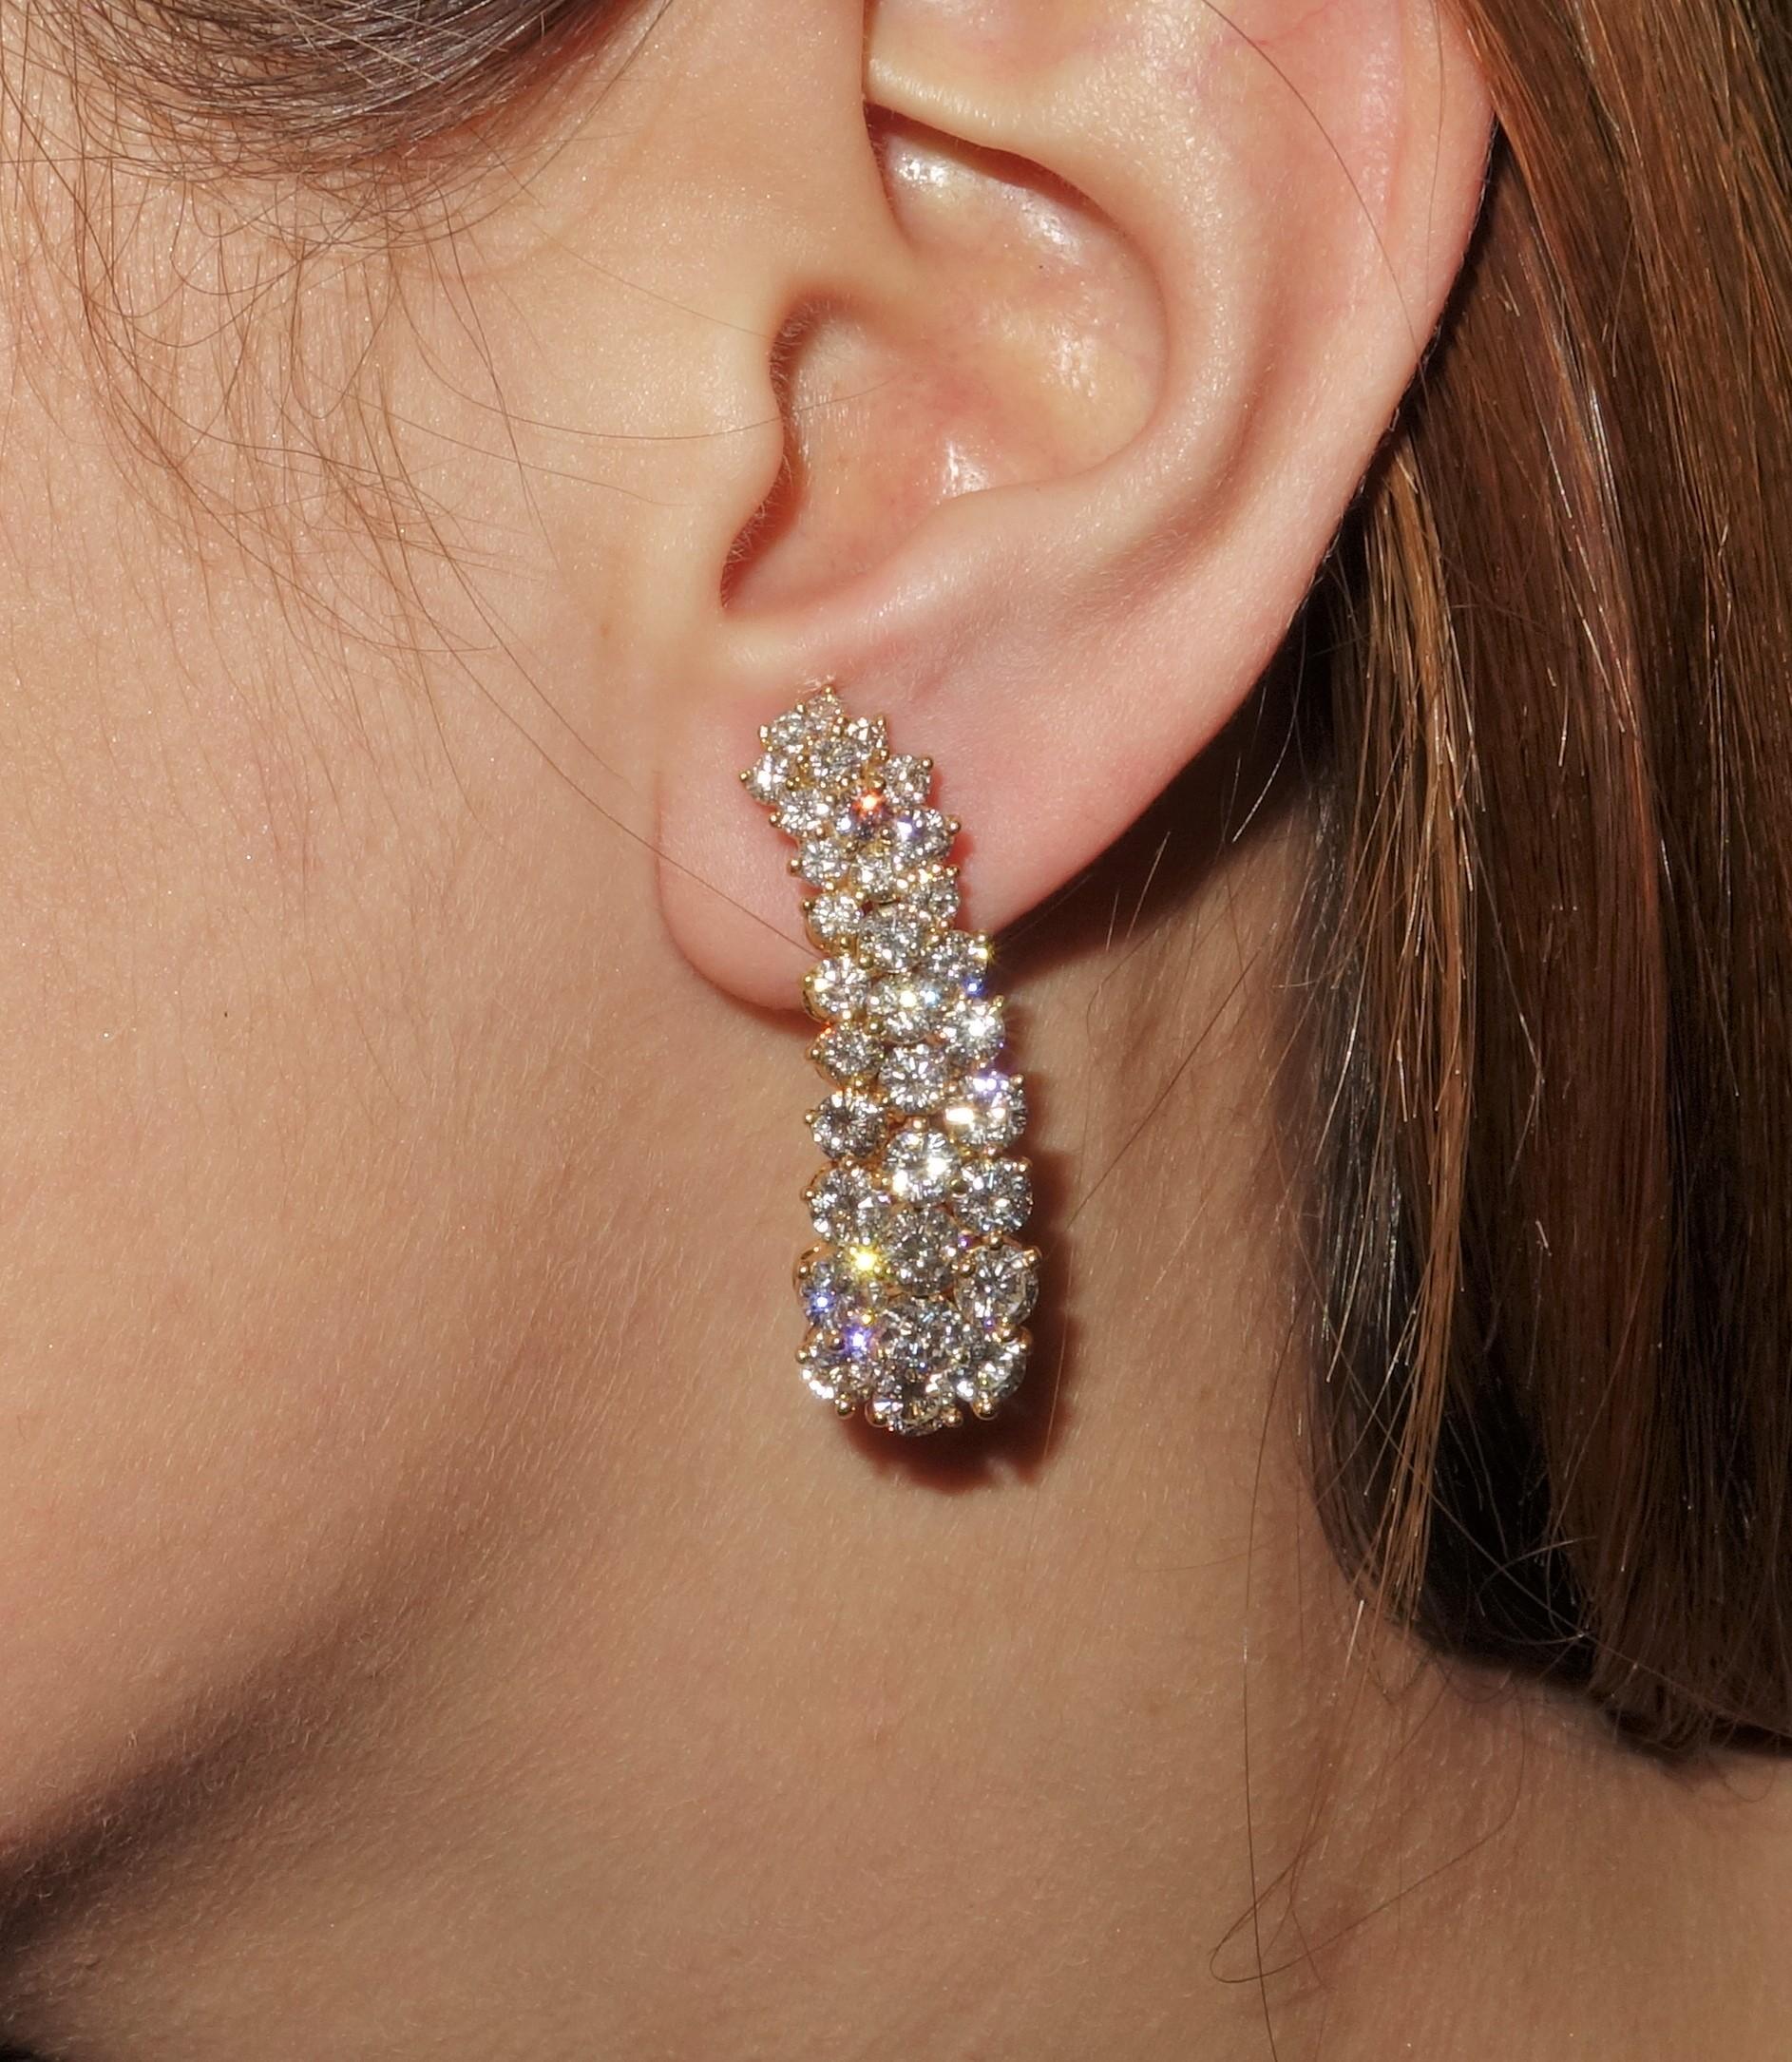 Stylish and Simply Beautiful Kurt Wayne Earrings featuring 7 Carat Diamonds; F color; VS2 clarity; Hand crafted in 18 Karat Yellow Gold. These earrings are attributed to Kurt Wayne and are fitted with a hinged clip-on backing. Ideal worn for day or